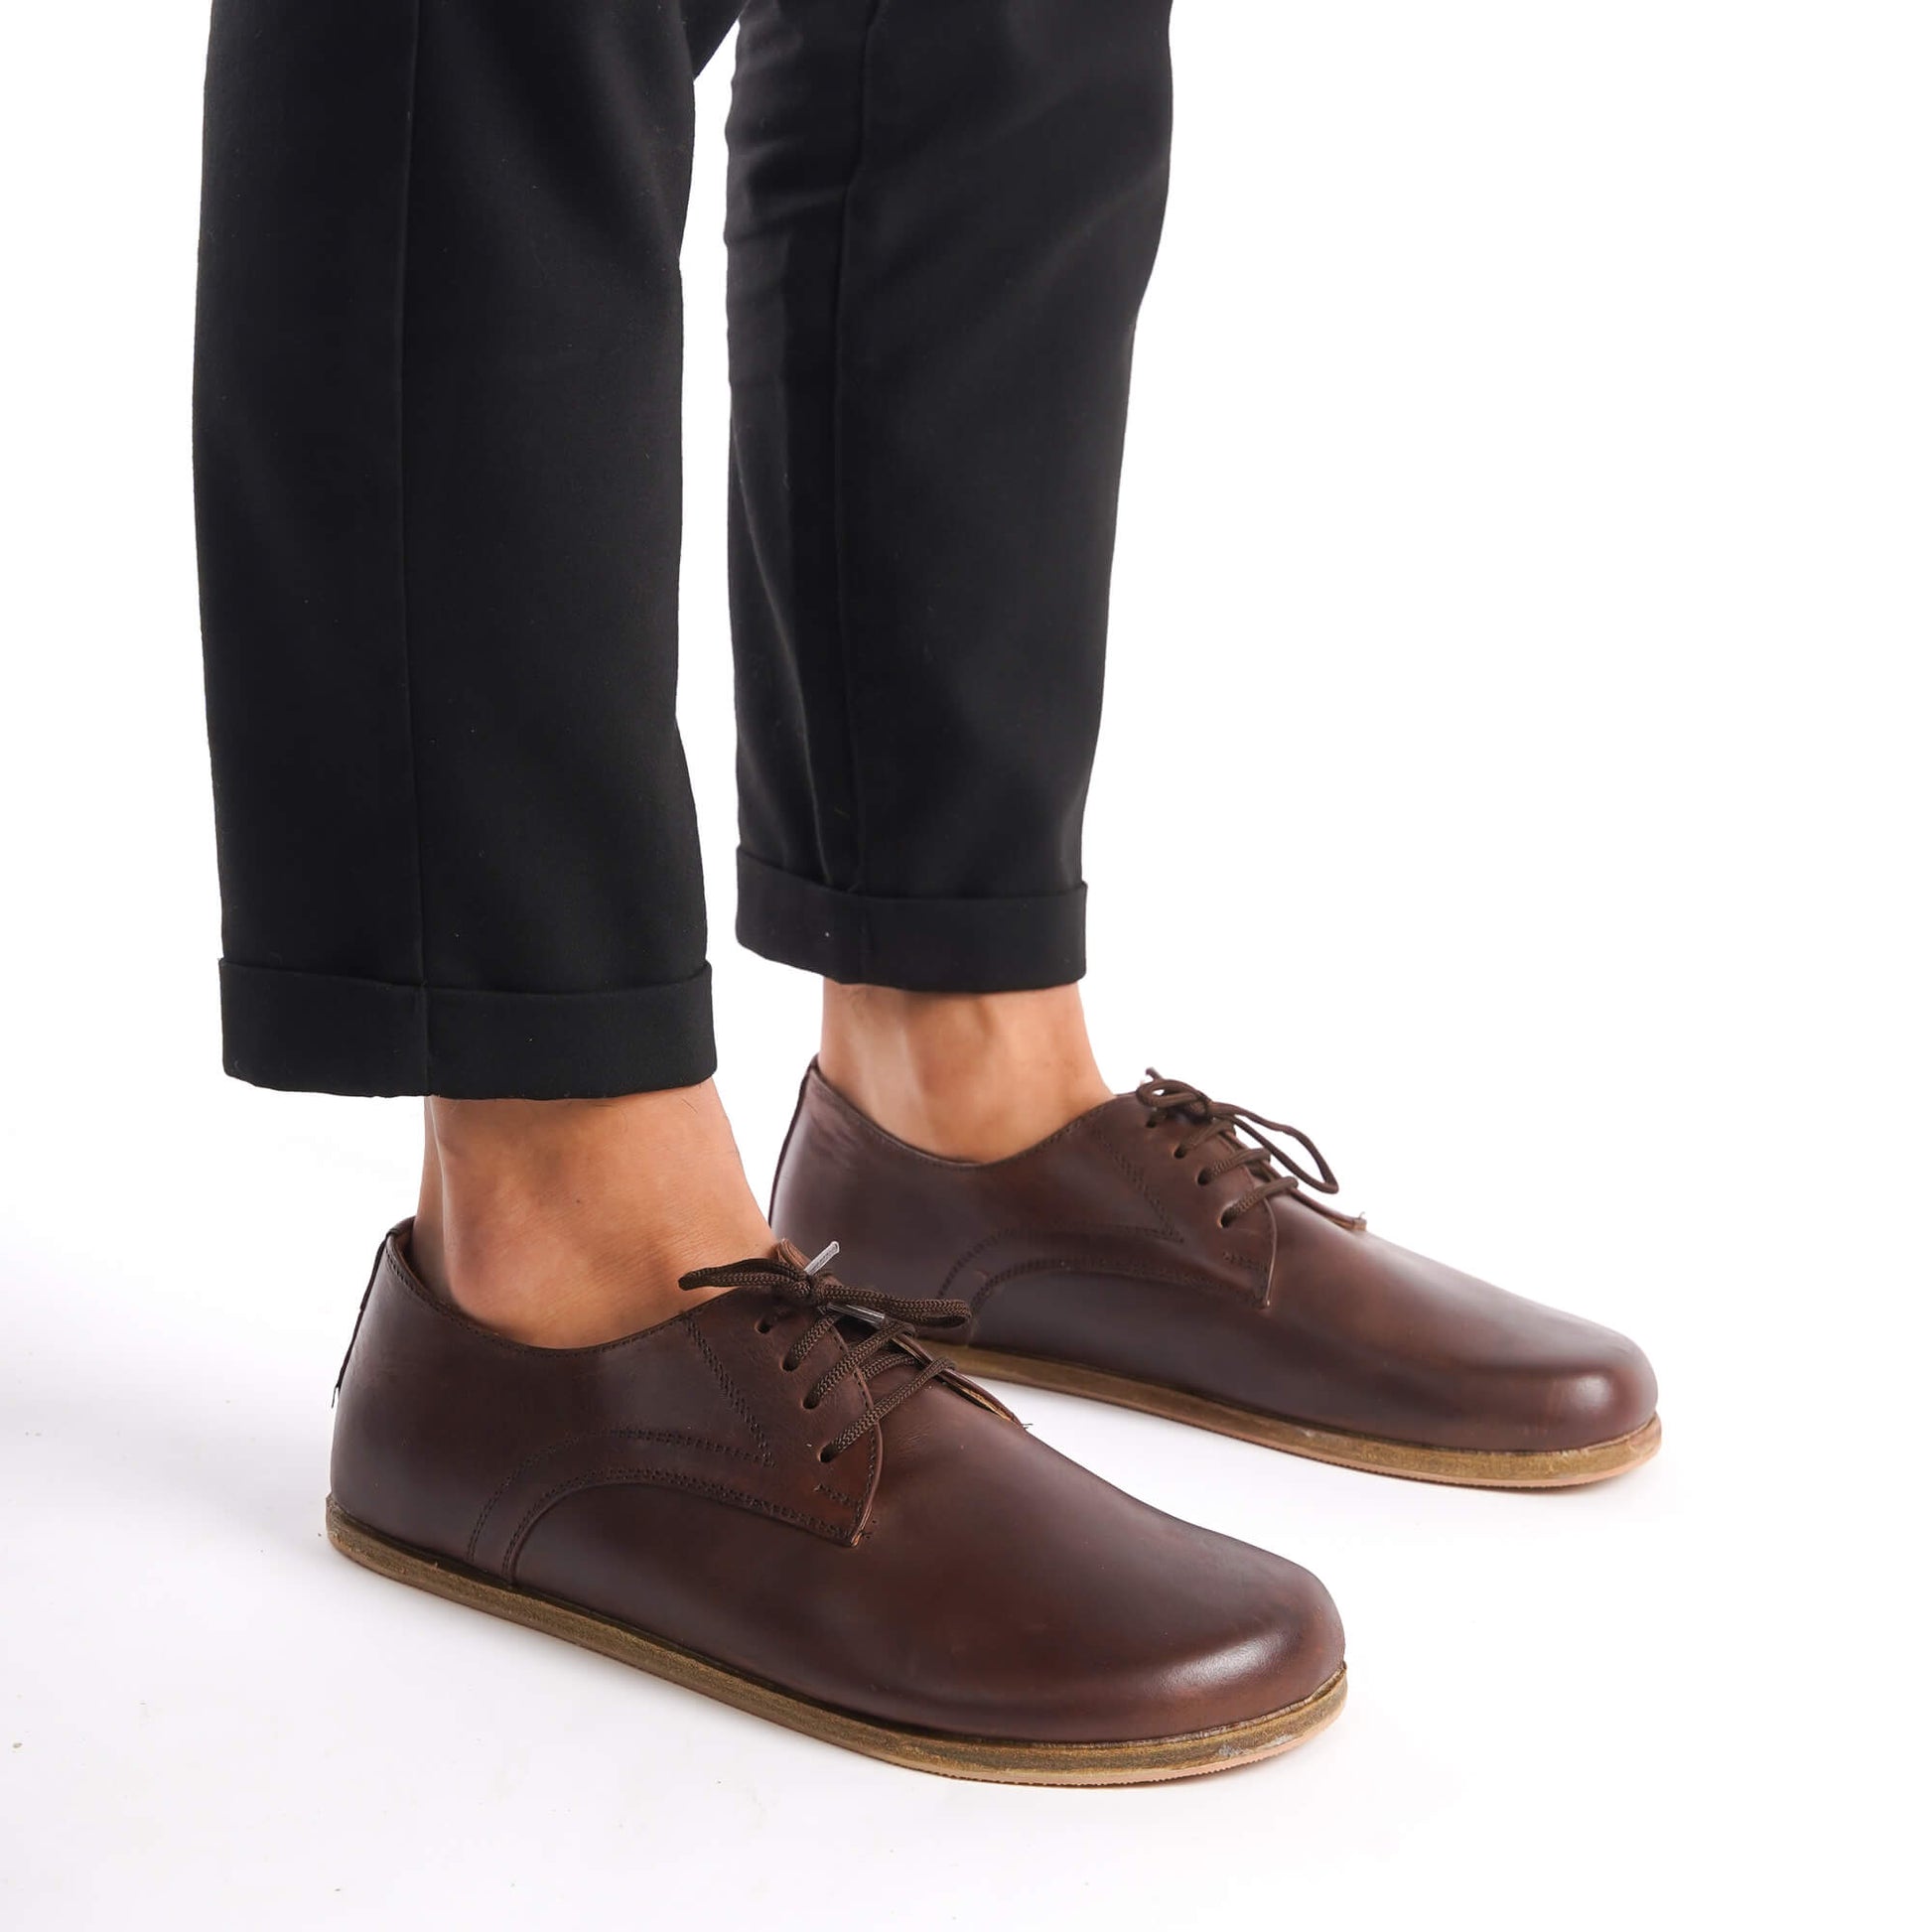 Locris Leather Barefoot Men's Oxfords in brown, worn by a model with black pants, perfect for a natural fit and foot health.